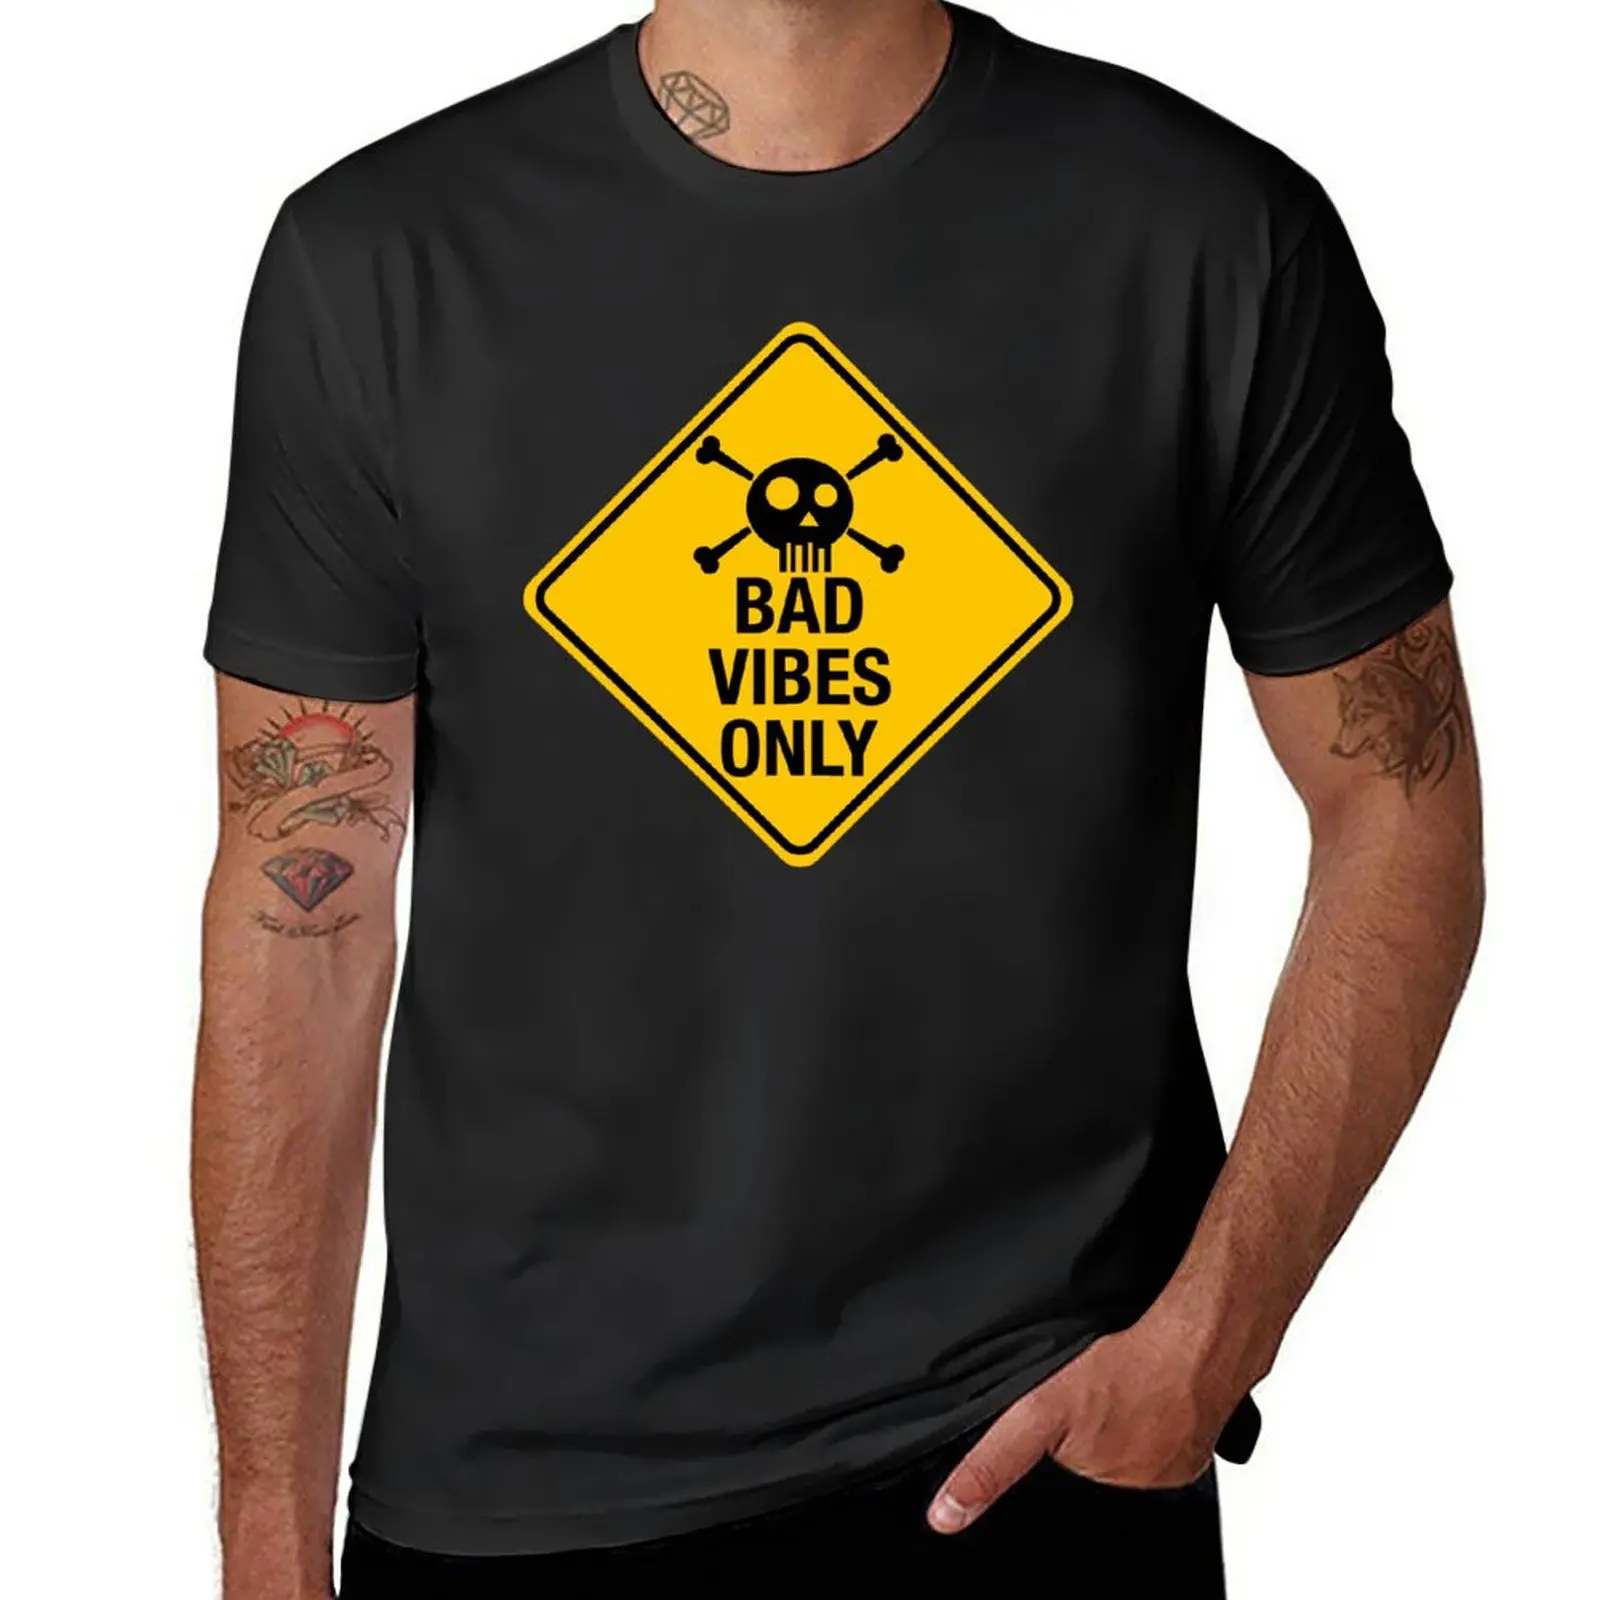 New Bad Vibes Only - Funny Sign T-Shirt tees cute tops mens graphic t-shirts big and tall